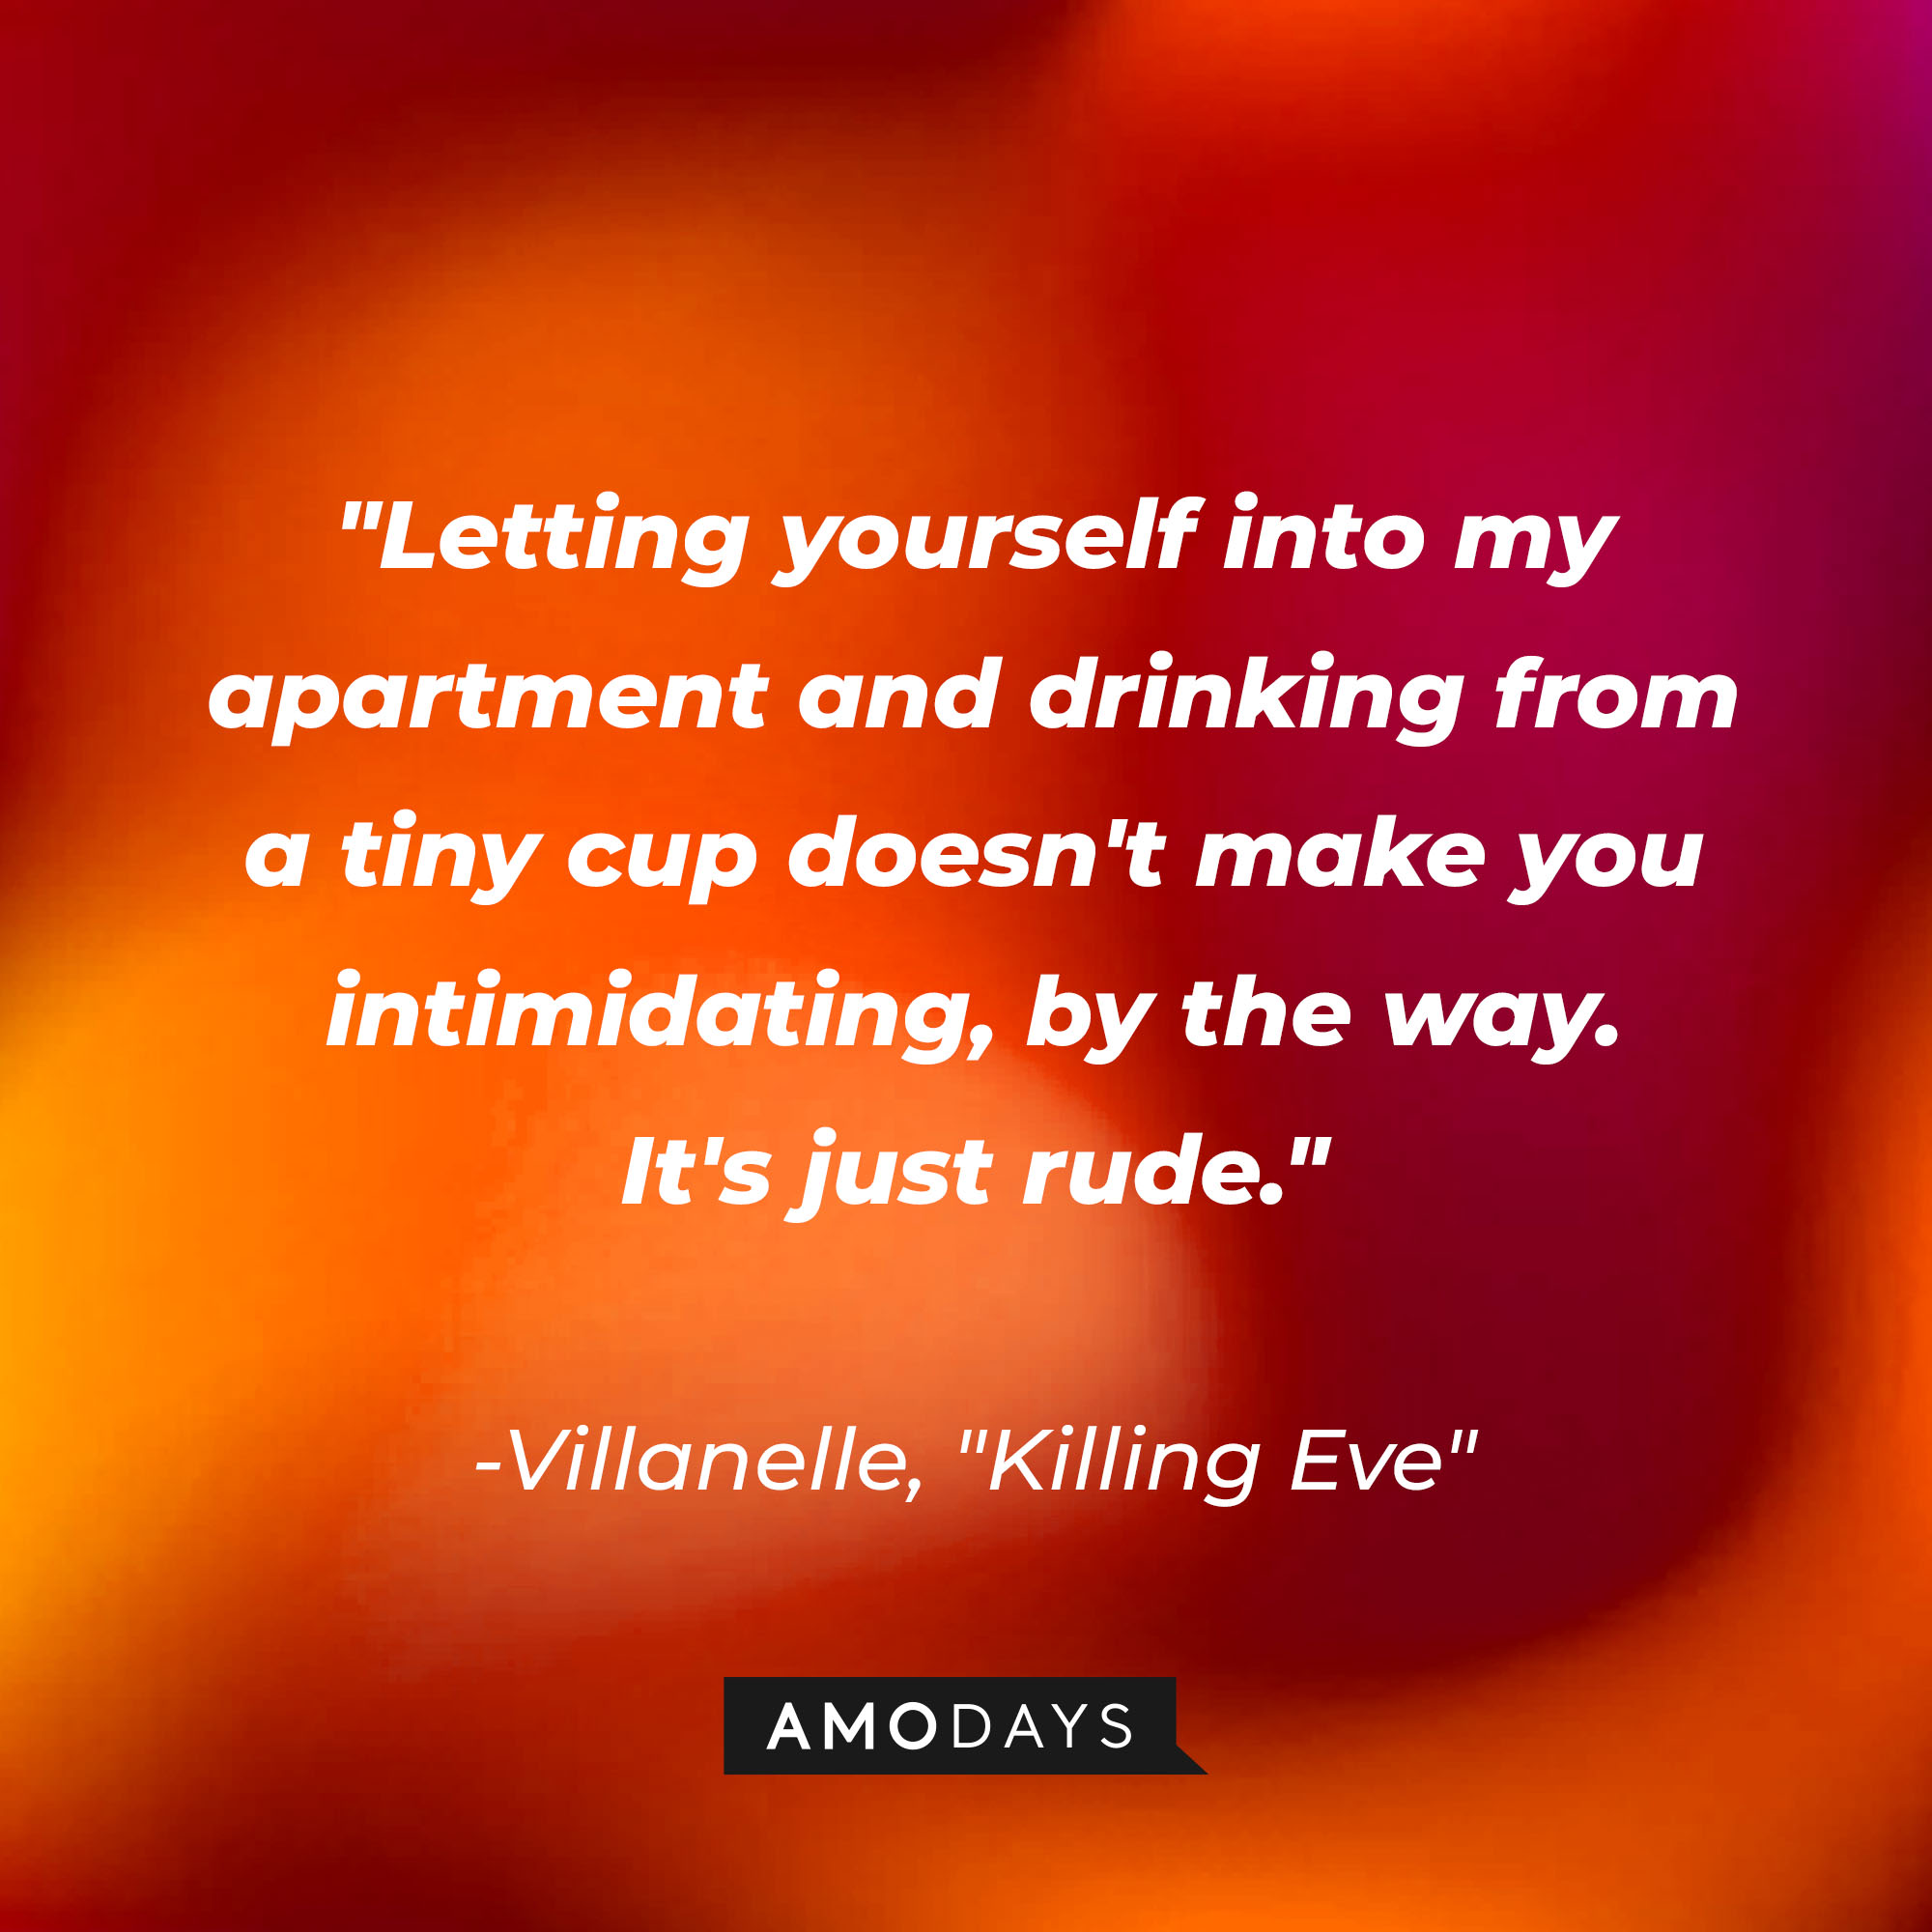 Villanelle's quote: "Letting yourself into my apartment and drinking from a tiny cup doesn't make you intimidating, by the way. It's just rude." | Source: Amodays